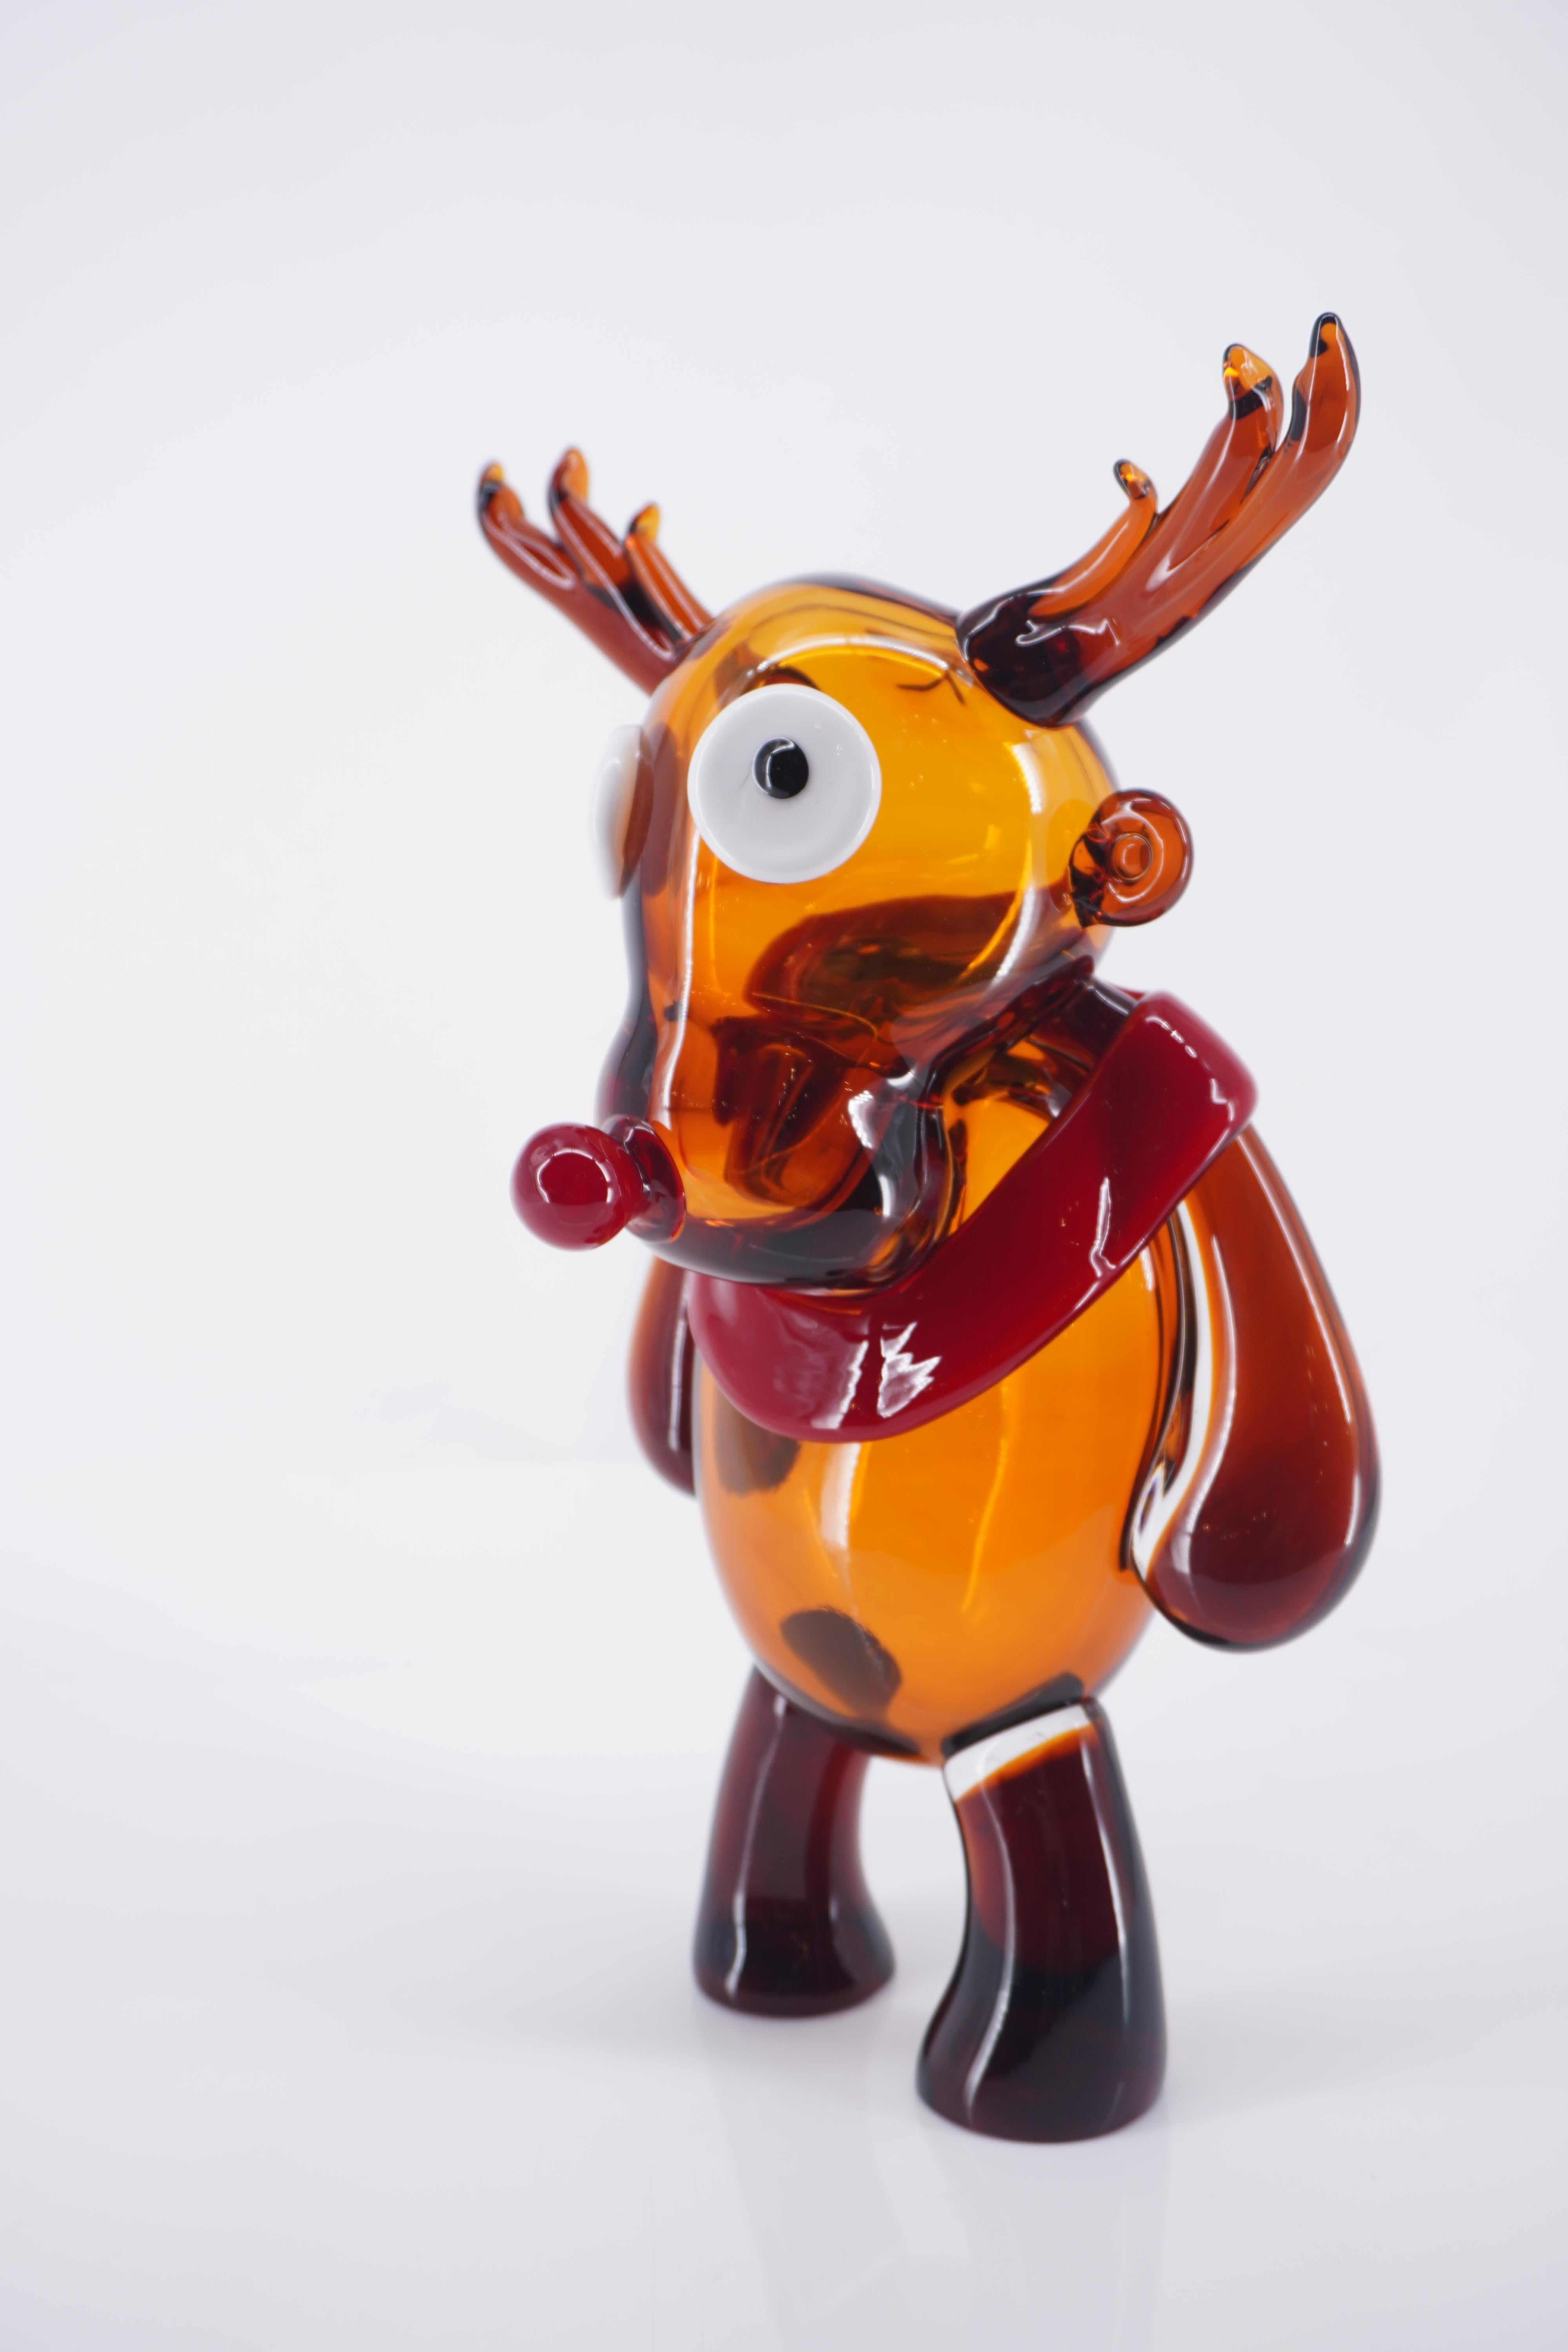 Santa Claus's reindeer is a blown glass  sculpture, created by Roberto Beltrami in Murano glass, a tribute to the Christmas time.

Part of a comic and pop collection in Murano glass, the 'PUPI' are 100% mouth-blown and entirely handmade, offering